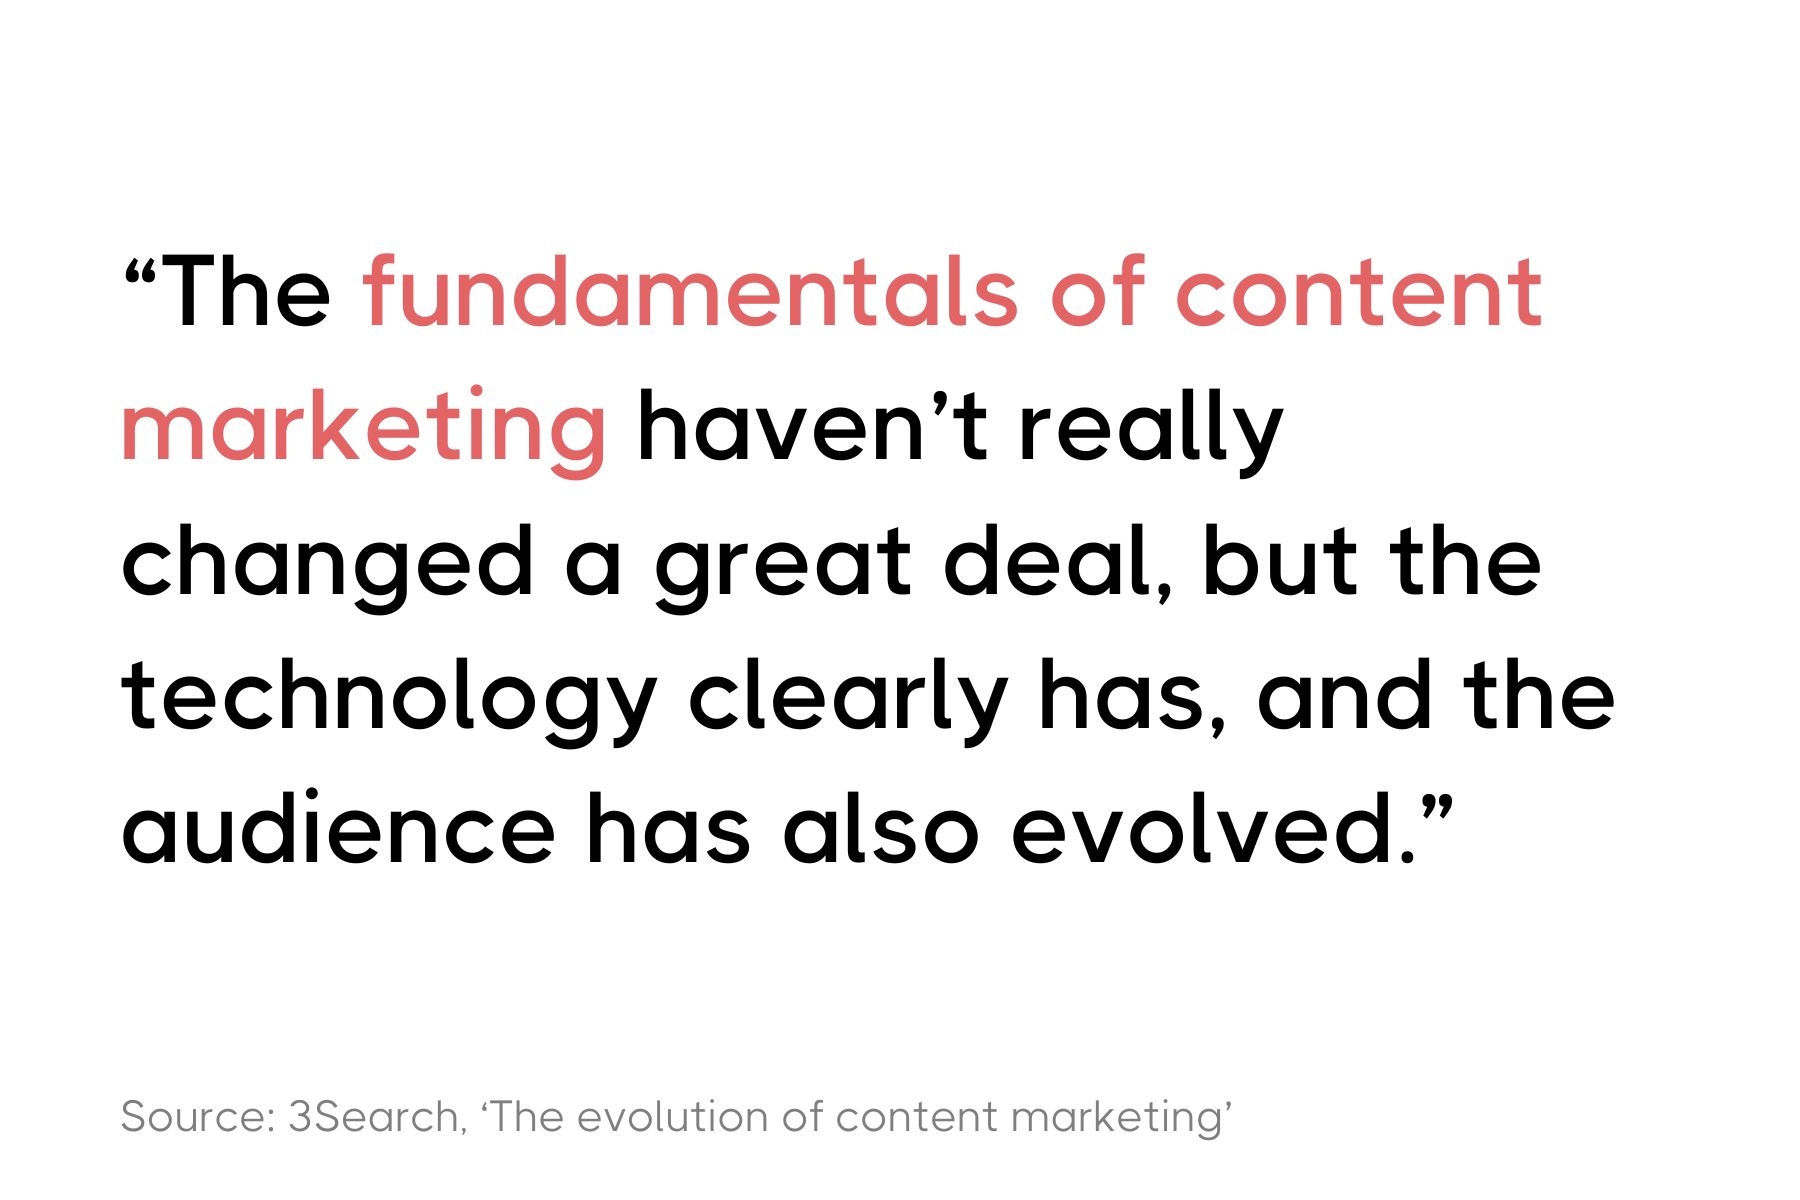 The image contains a quote stating, "The fundamentals of content marketing haven't really changed a great deal, but the technology clearly has, and the audience has also evolved." It is attributed to a source named 3Search, from a piece titled 'The evolution of content marketing.' The text is styled in a simple, modern font and centered on a plain background, focusing solely on the message.